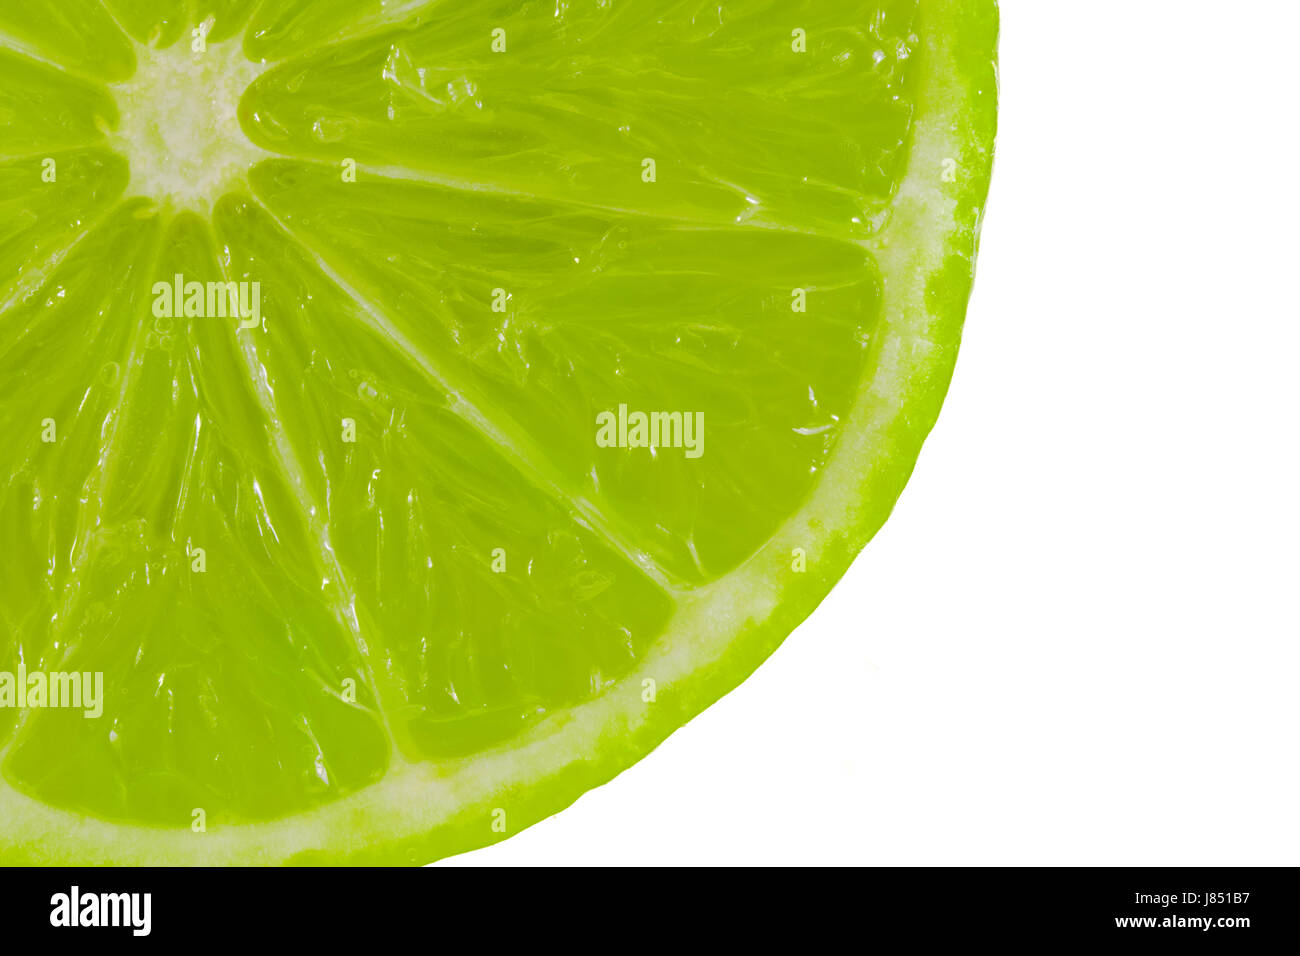 isolated fruit lime green section health macro close-up macro admission close Stock Photo